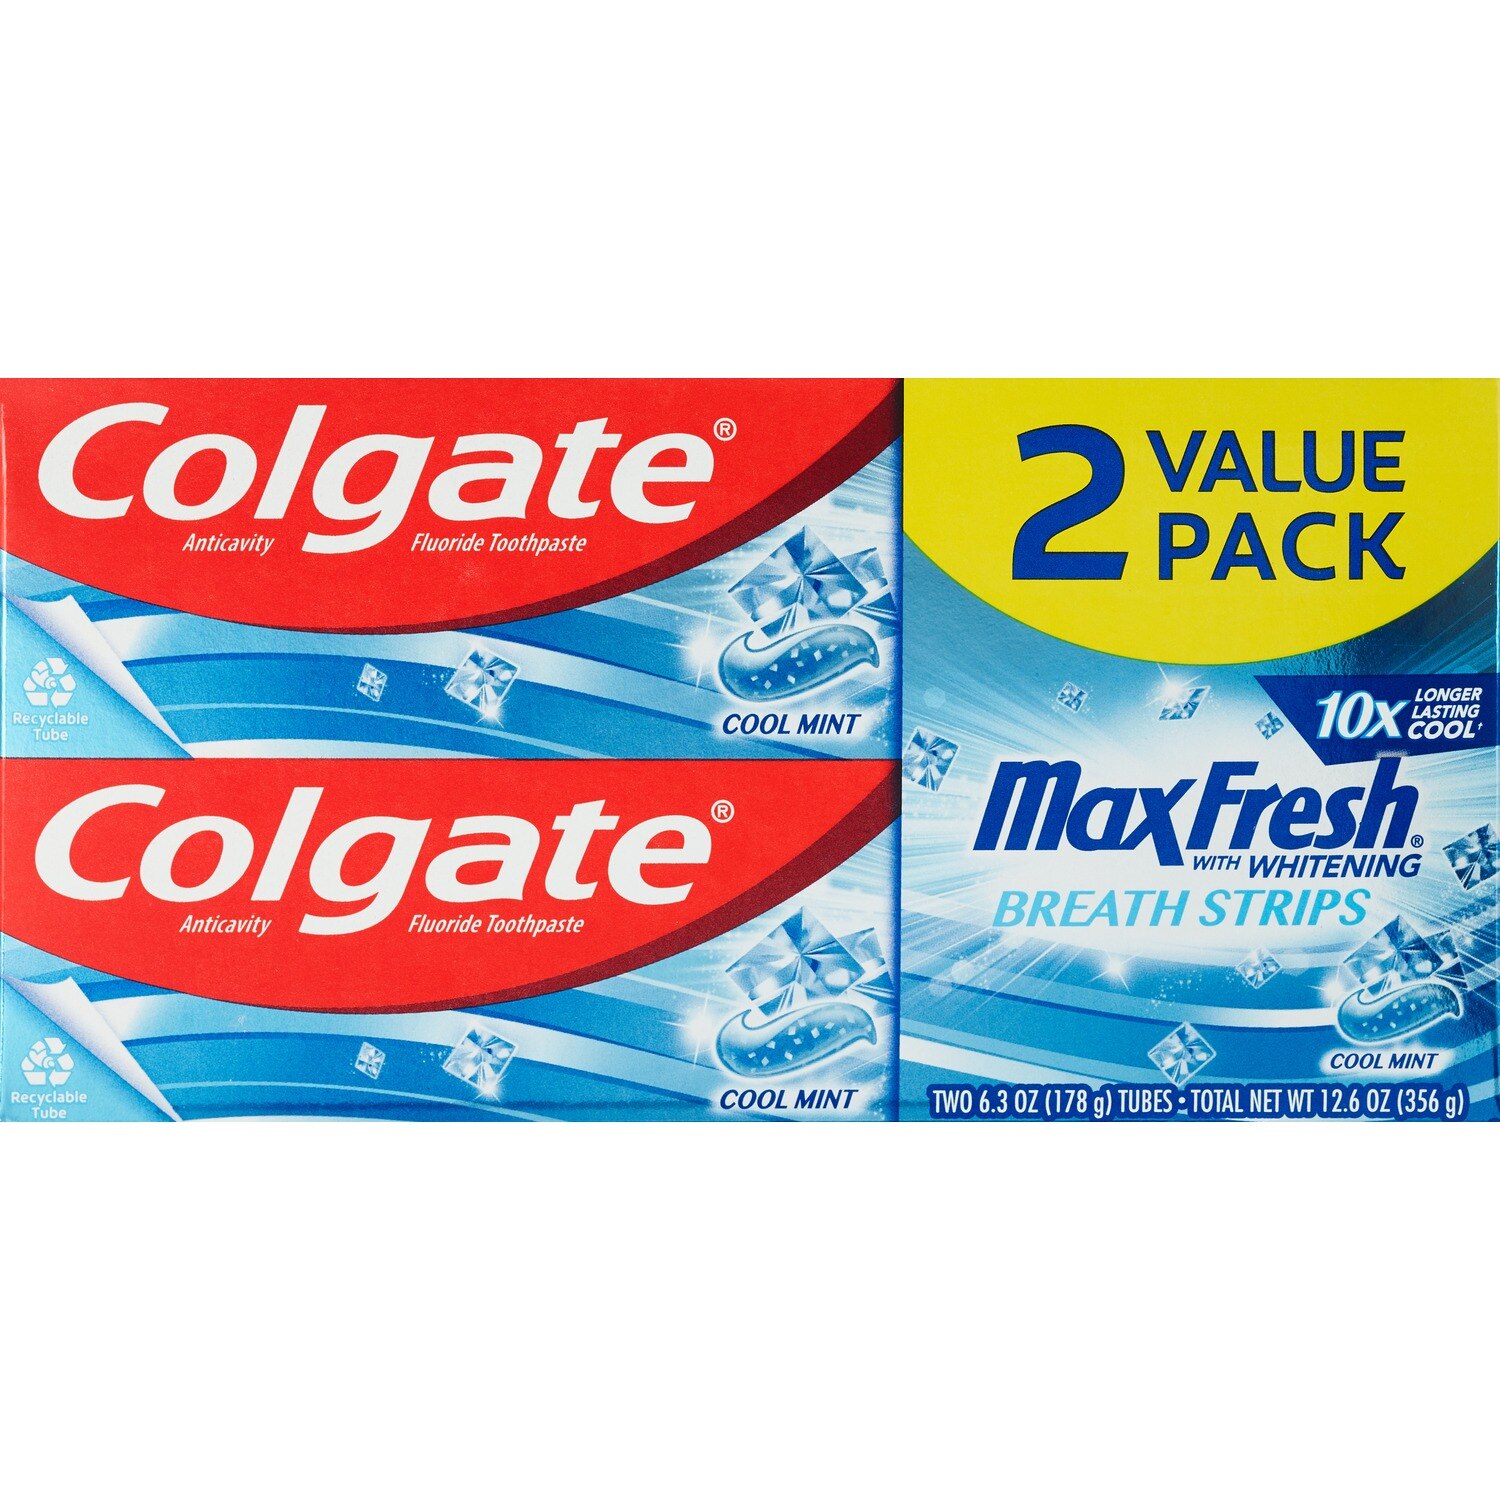 Colgate Max Fresh Whitening Anticavity Fluoride Toothpaste With Breath Strips, Cool Mint, 6.3 OZ, 2 Ct , CVS